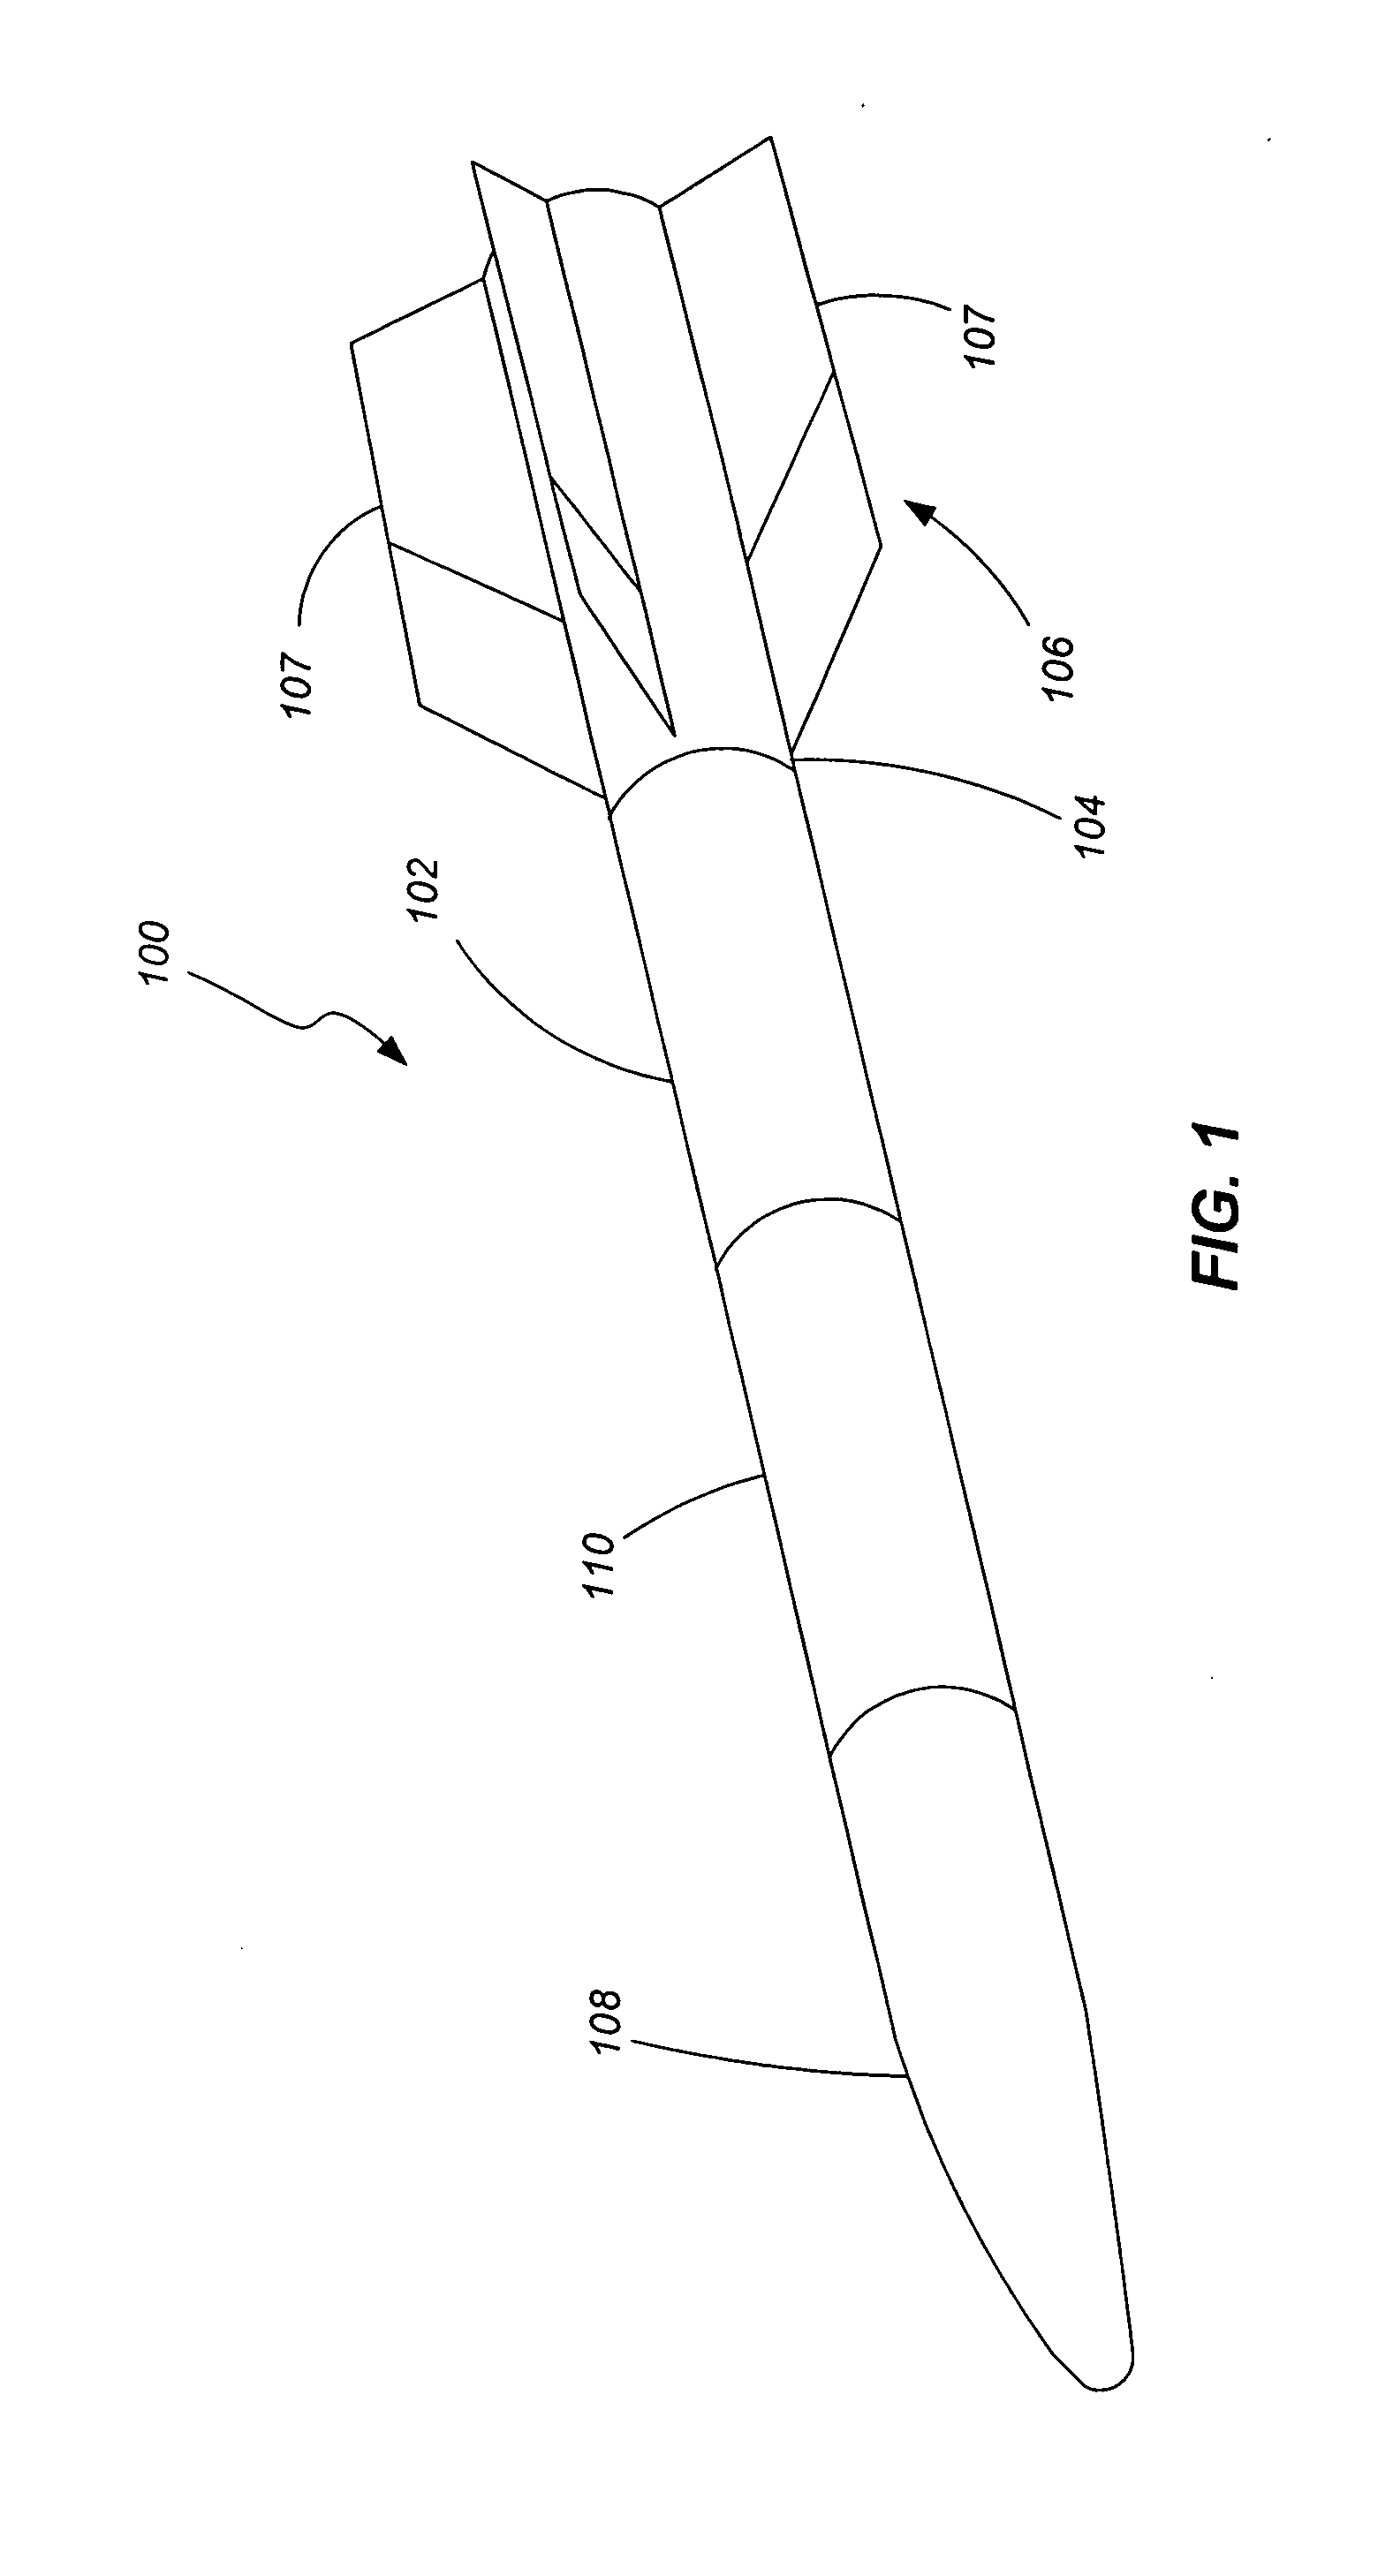 Weapons and weapon components incorporating reactive materials and related methods